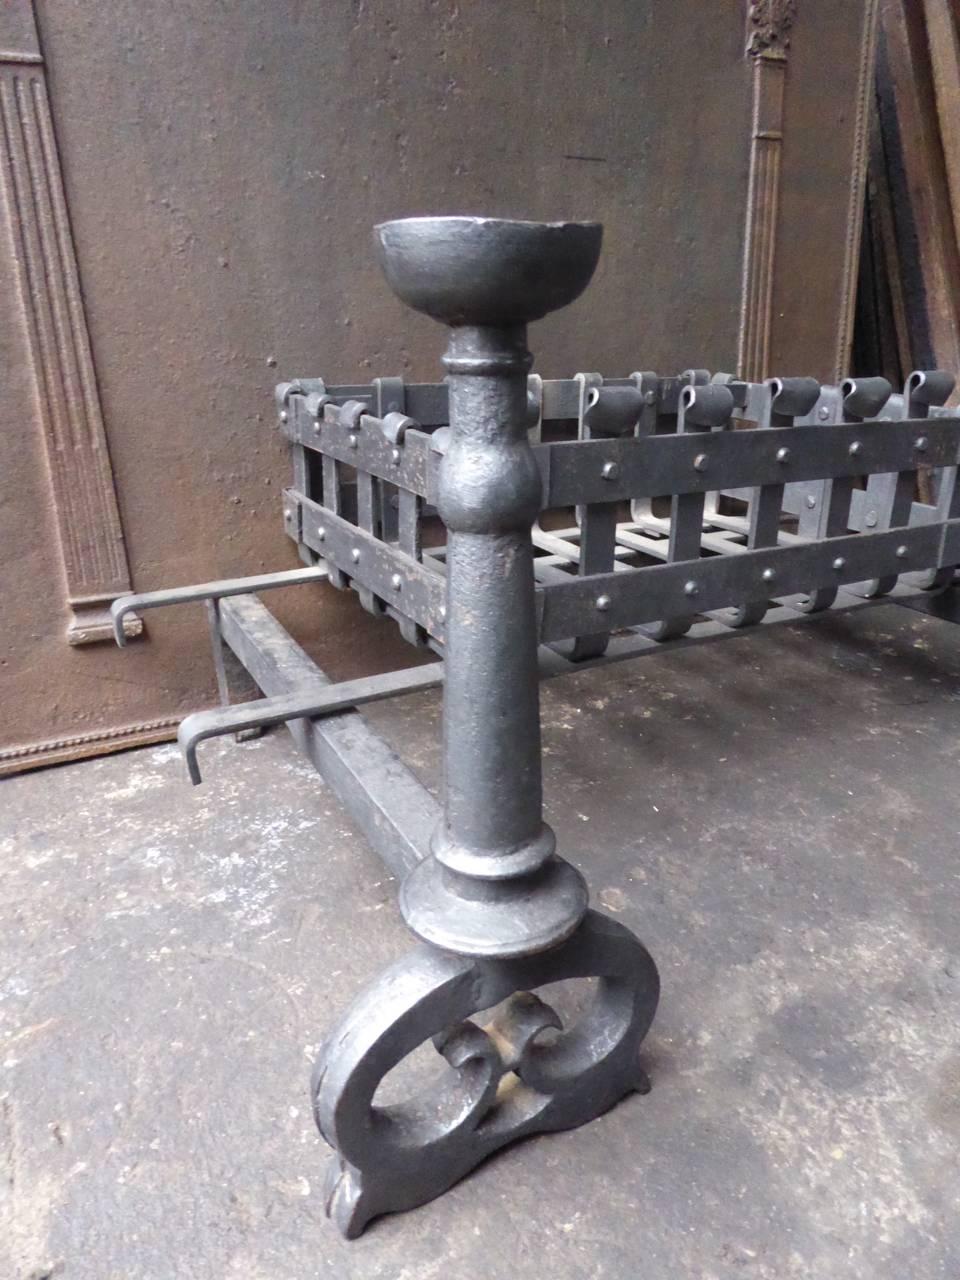 Gothic Revival 19th Century English Fire Grate or Fire Basket